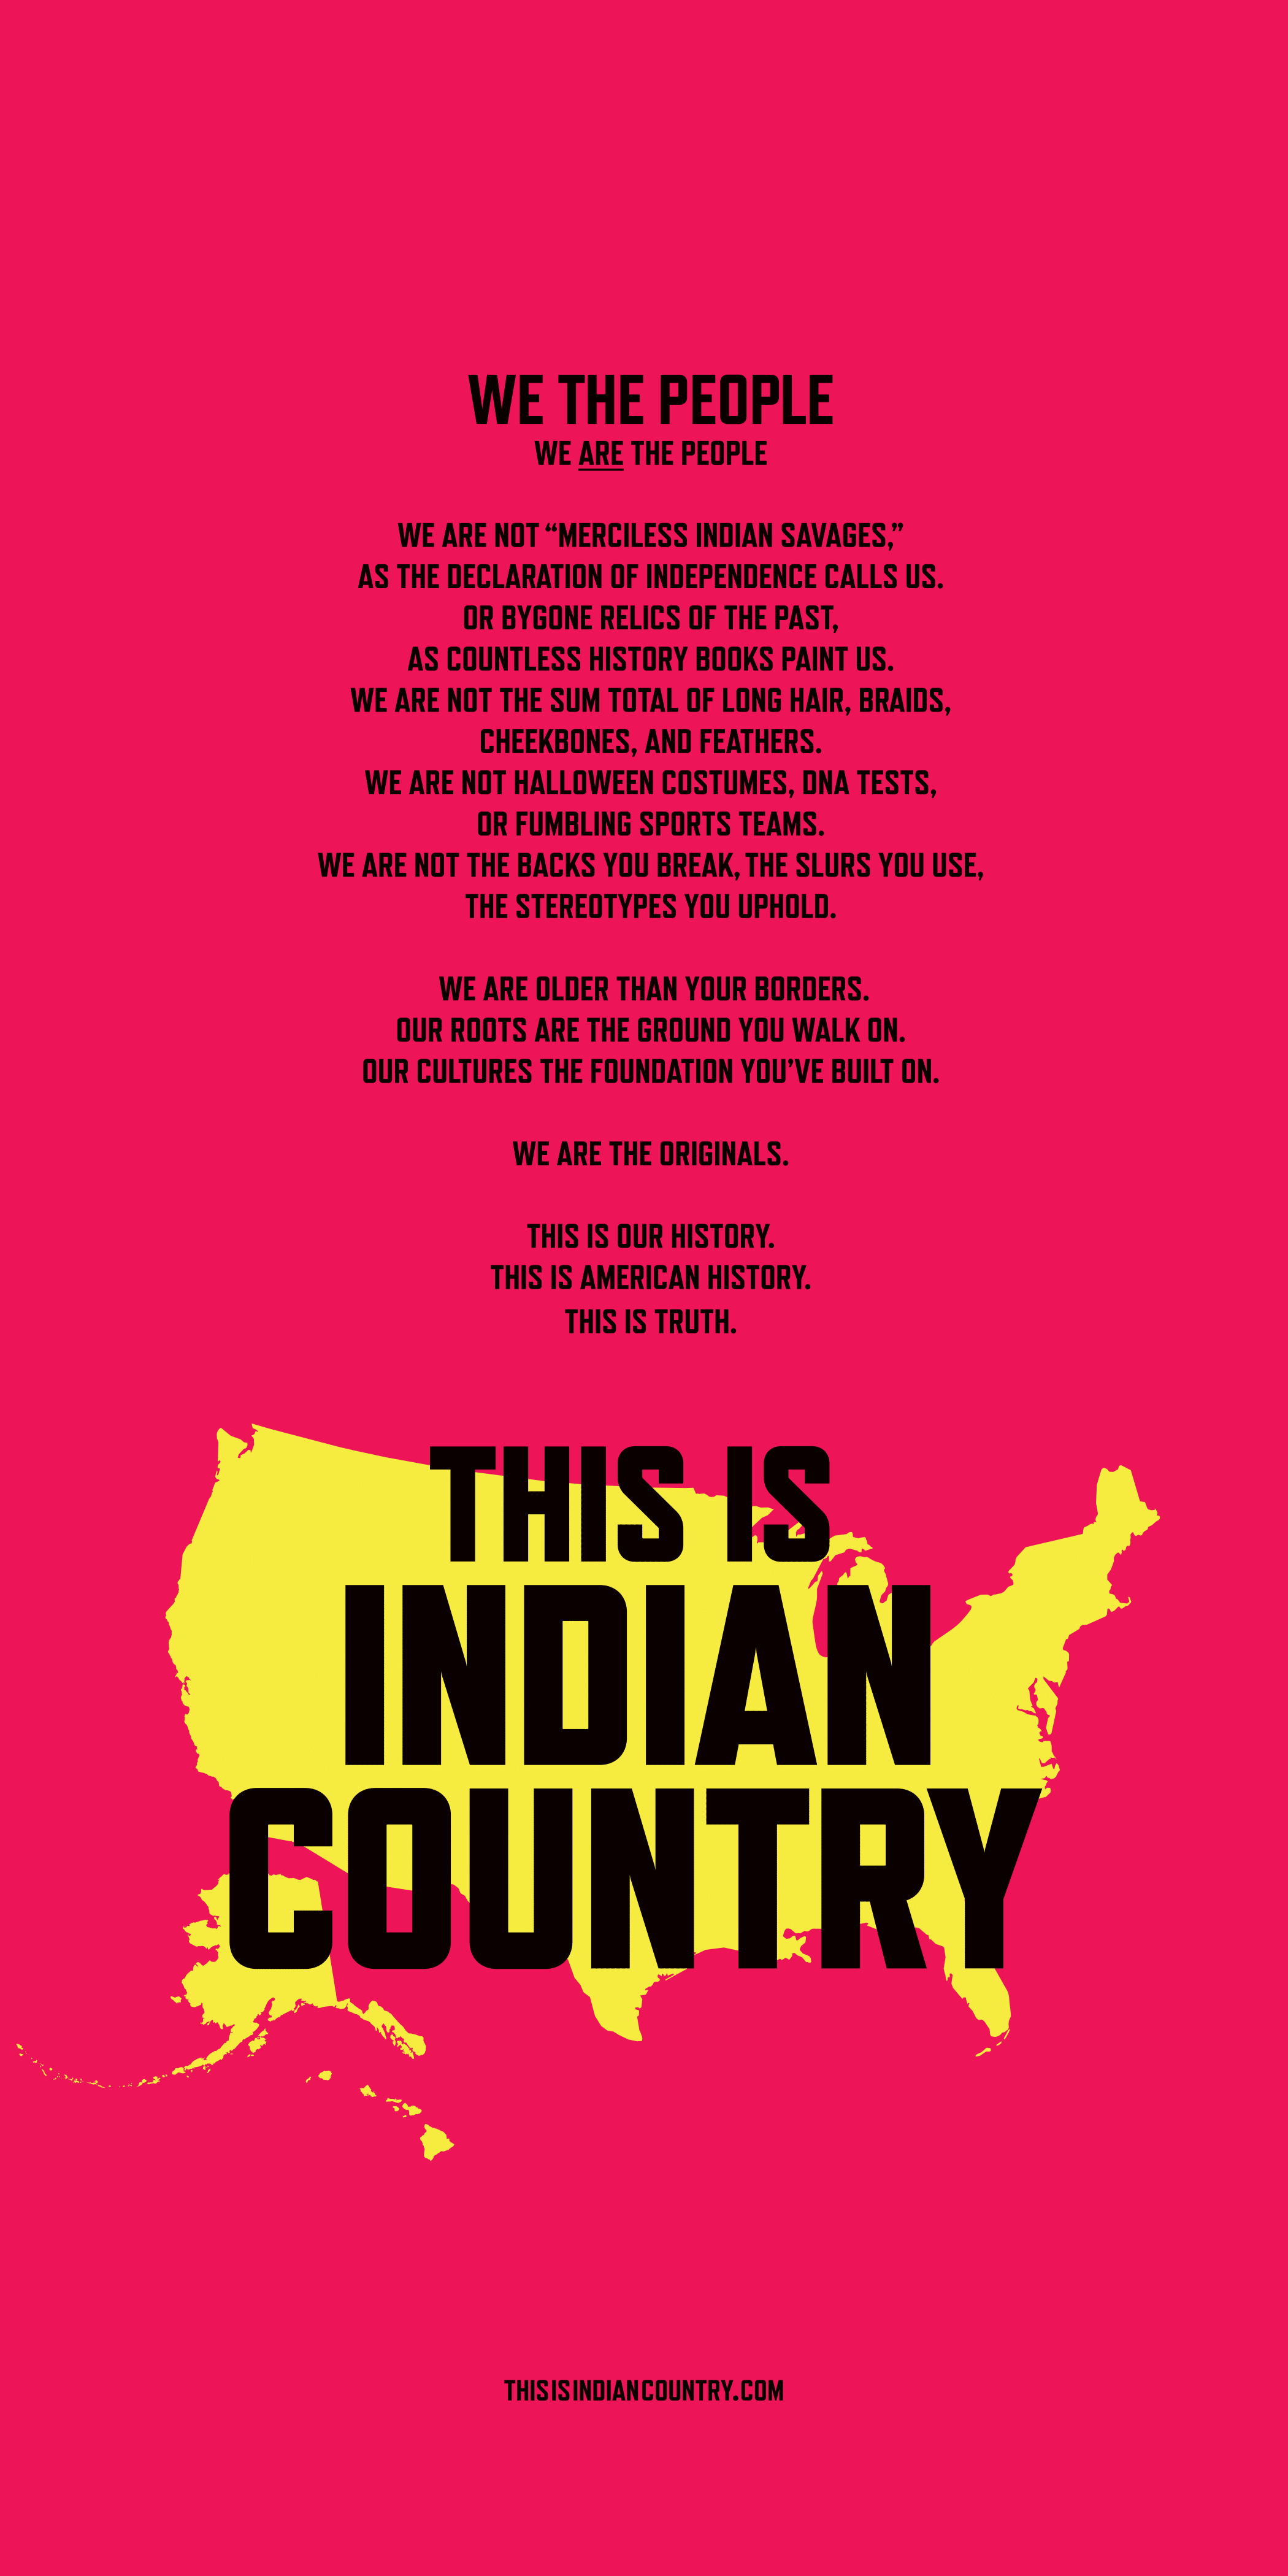 New York Times ad for This Is Indian Country